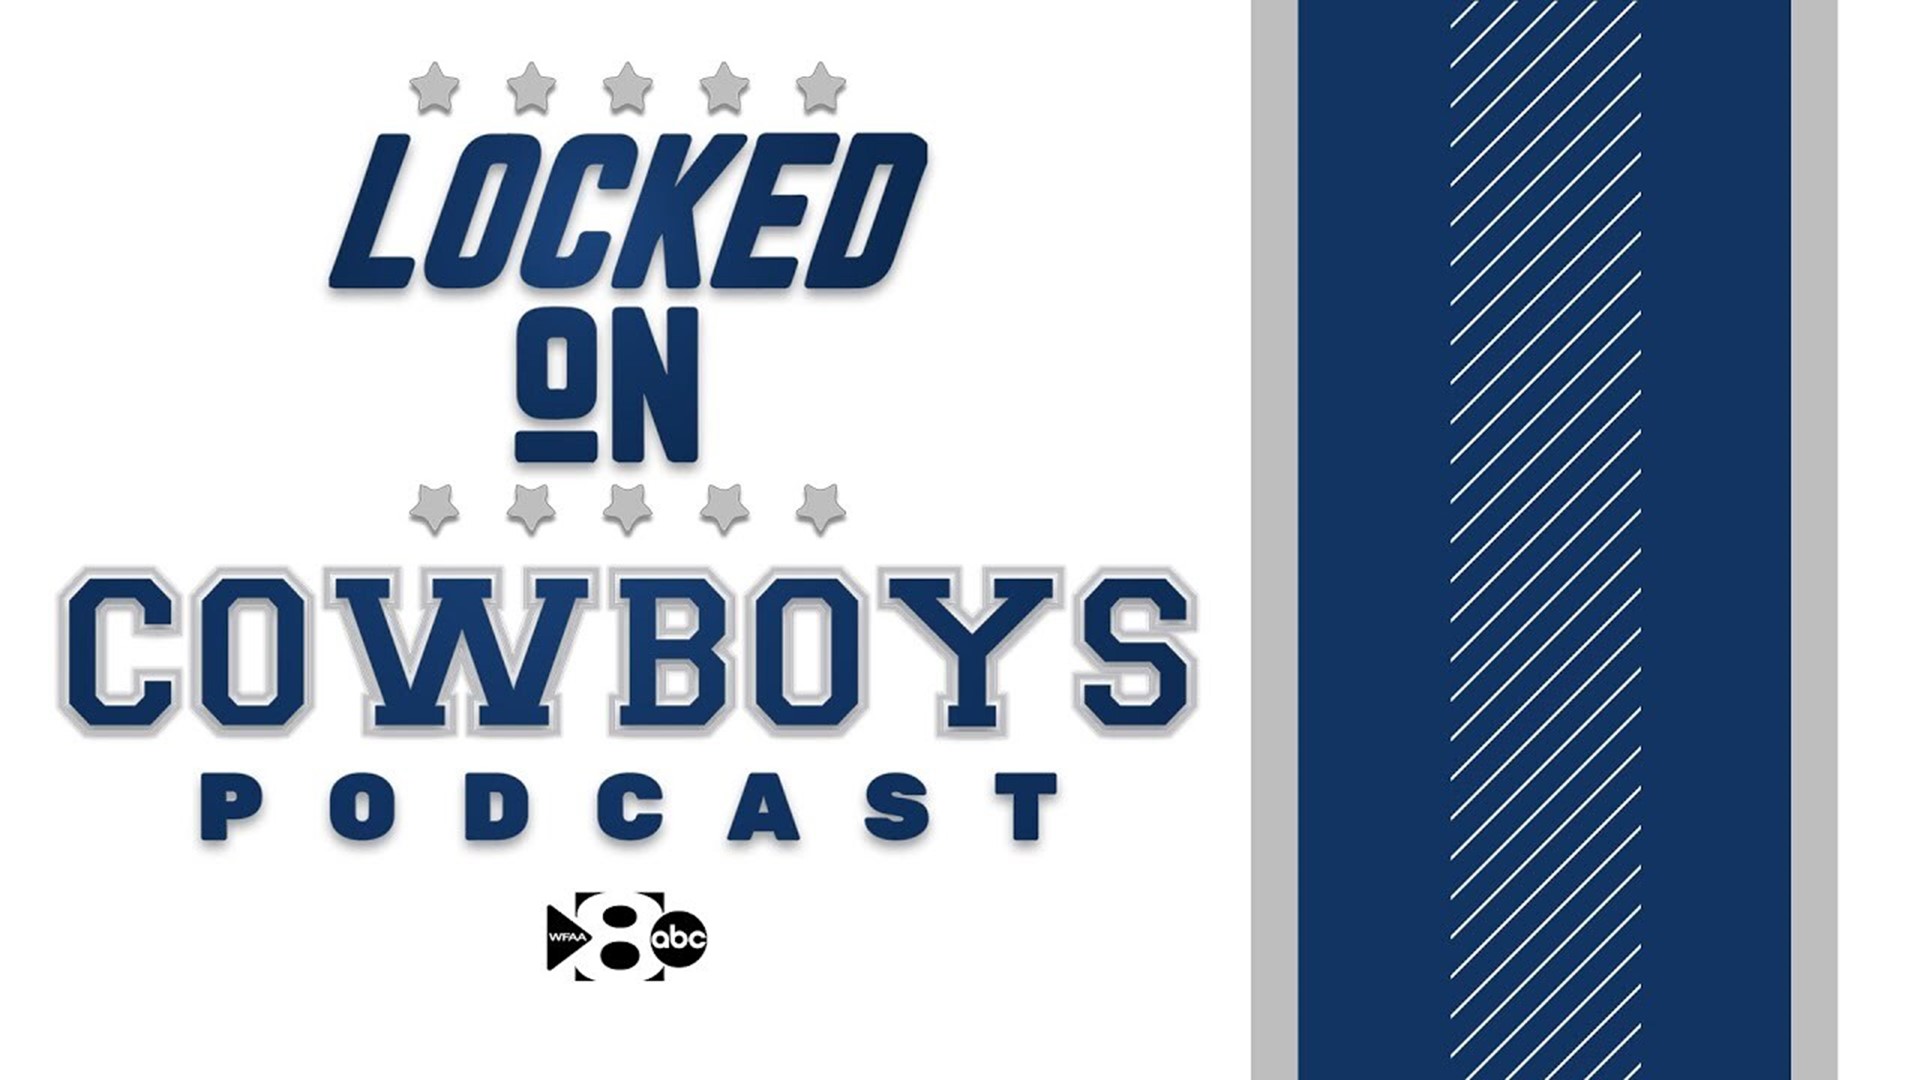 In this episode of the Locked On Cowboys Podcast, Marcus Mosher and Landon McCool run their third mock draft simulation.